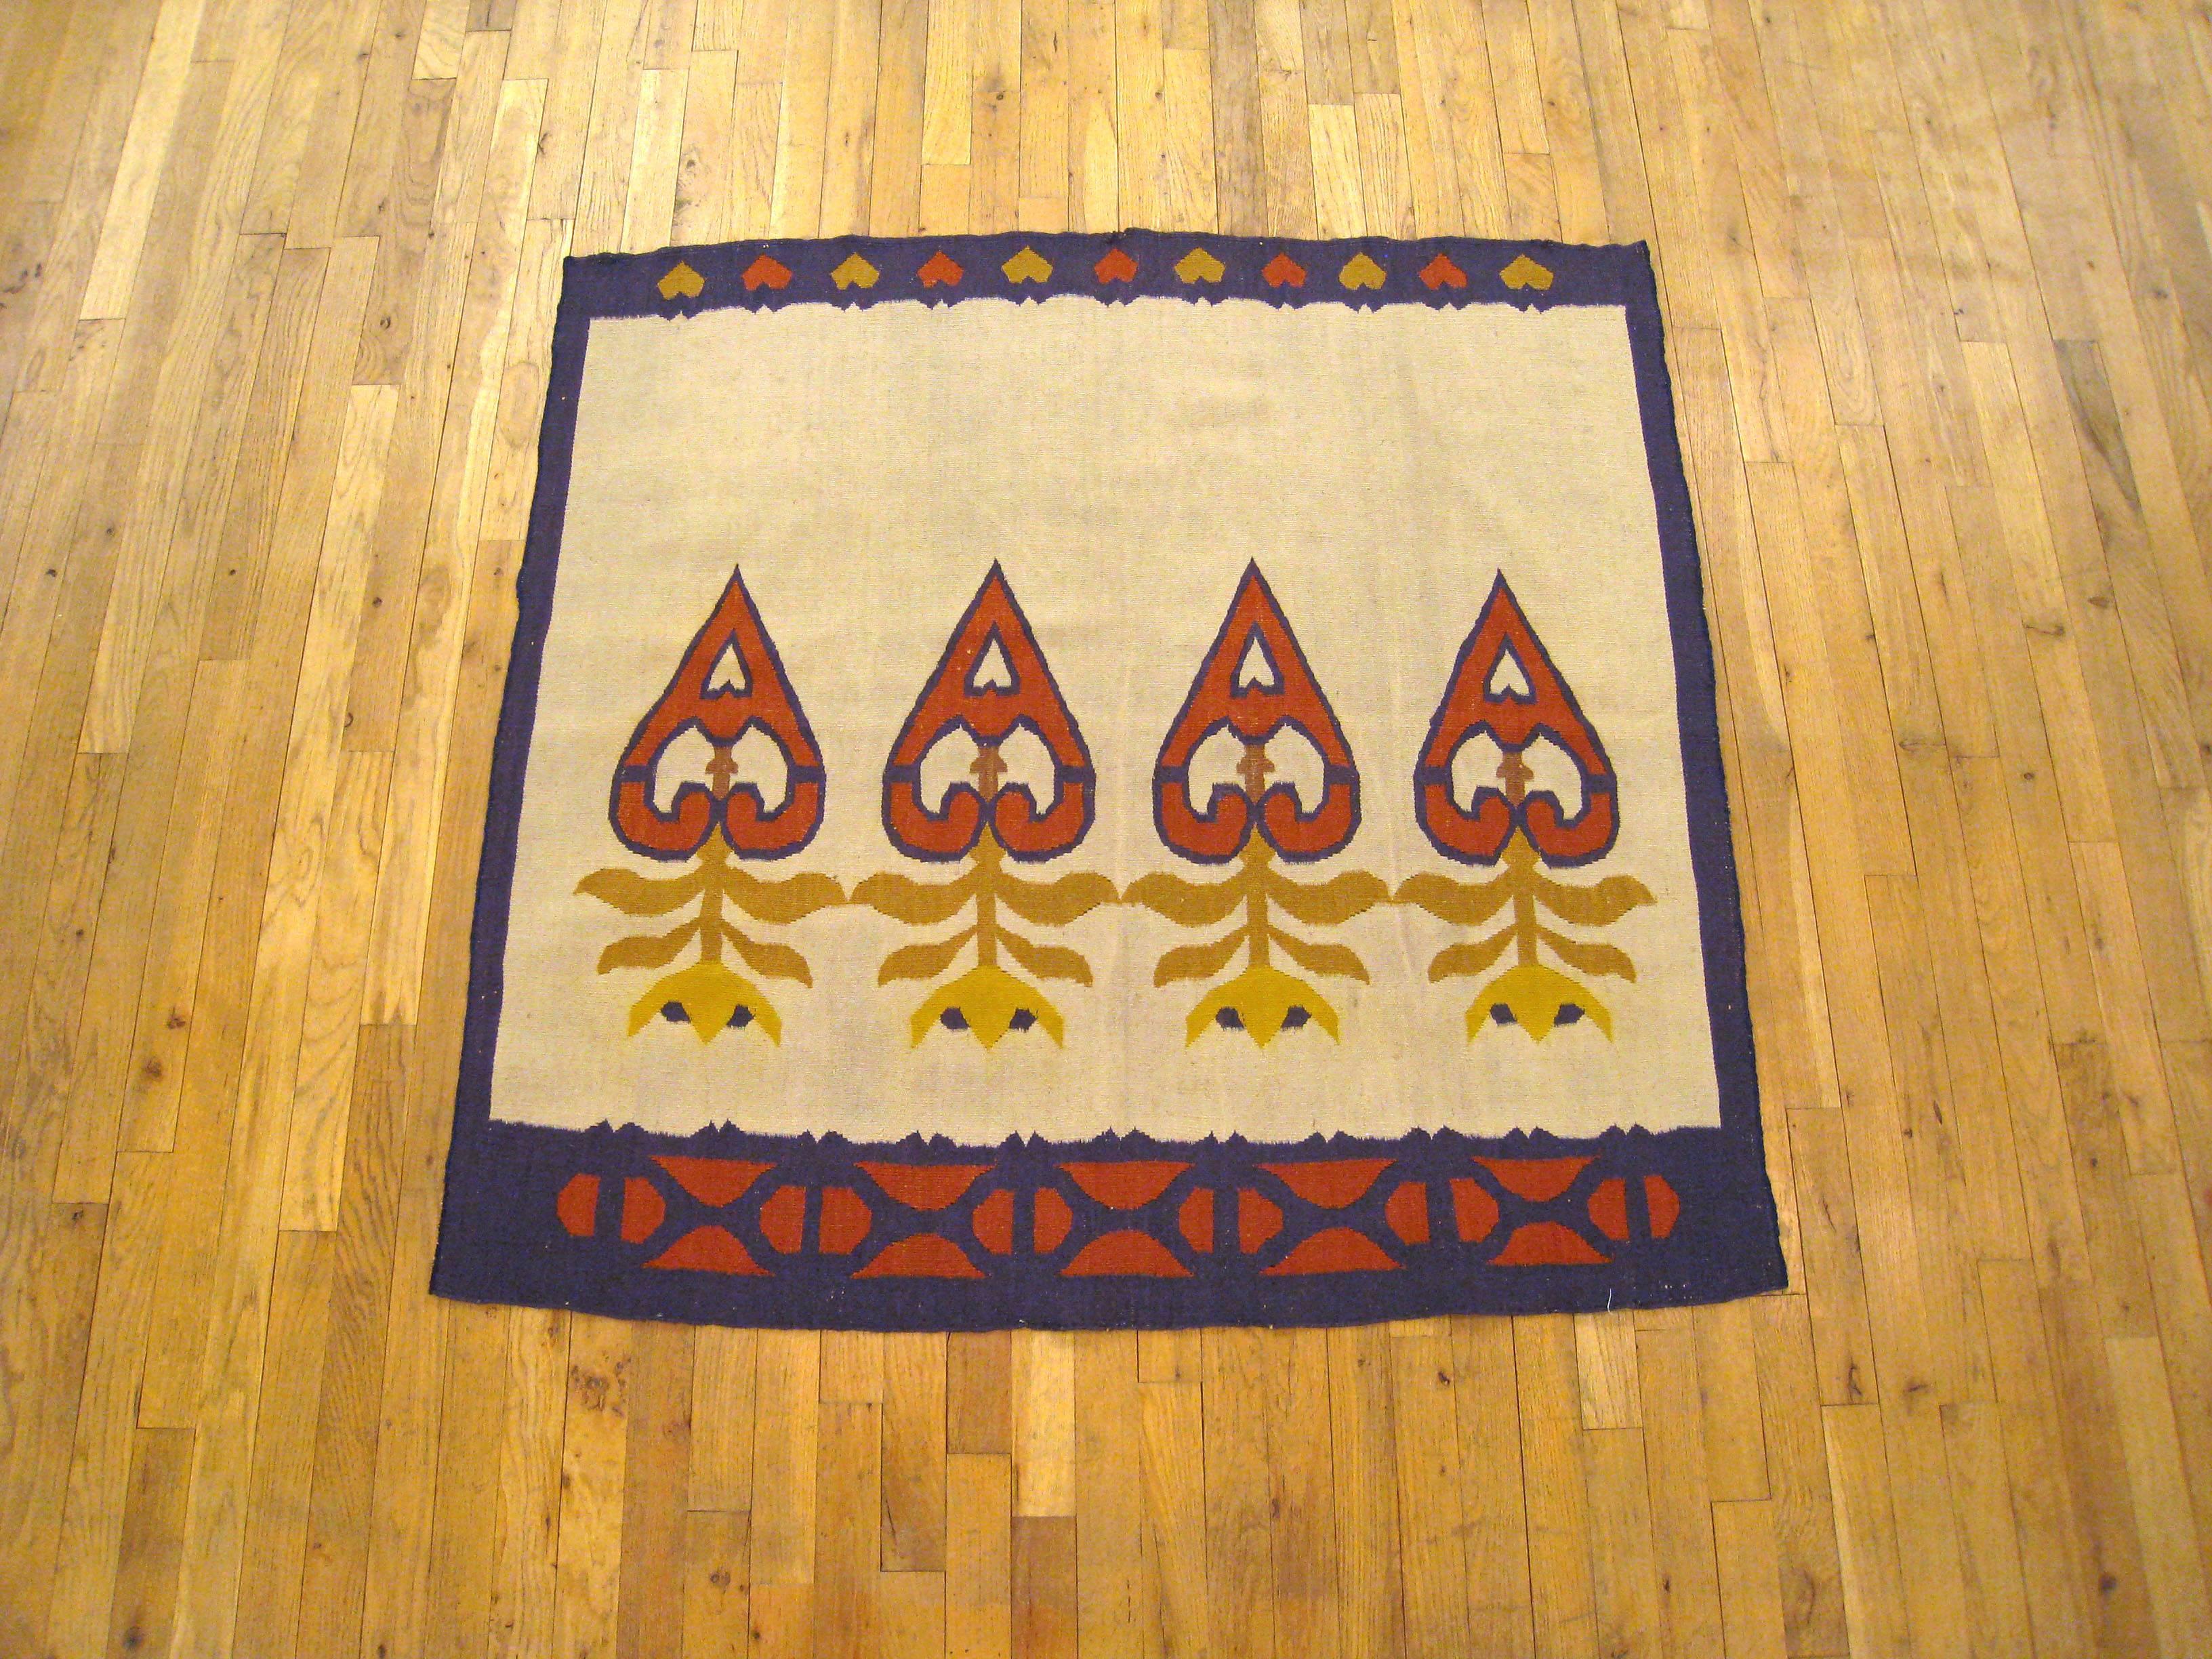 A vintage Turkish Kilim oriental rug, size 4' x 4', circa 1940. This hand-knotted, flat-woven decorative carpet features a rarely found ivory ground in the central field, highlighted by four stylized flowers. The central frame is enclosed within a